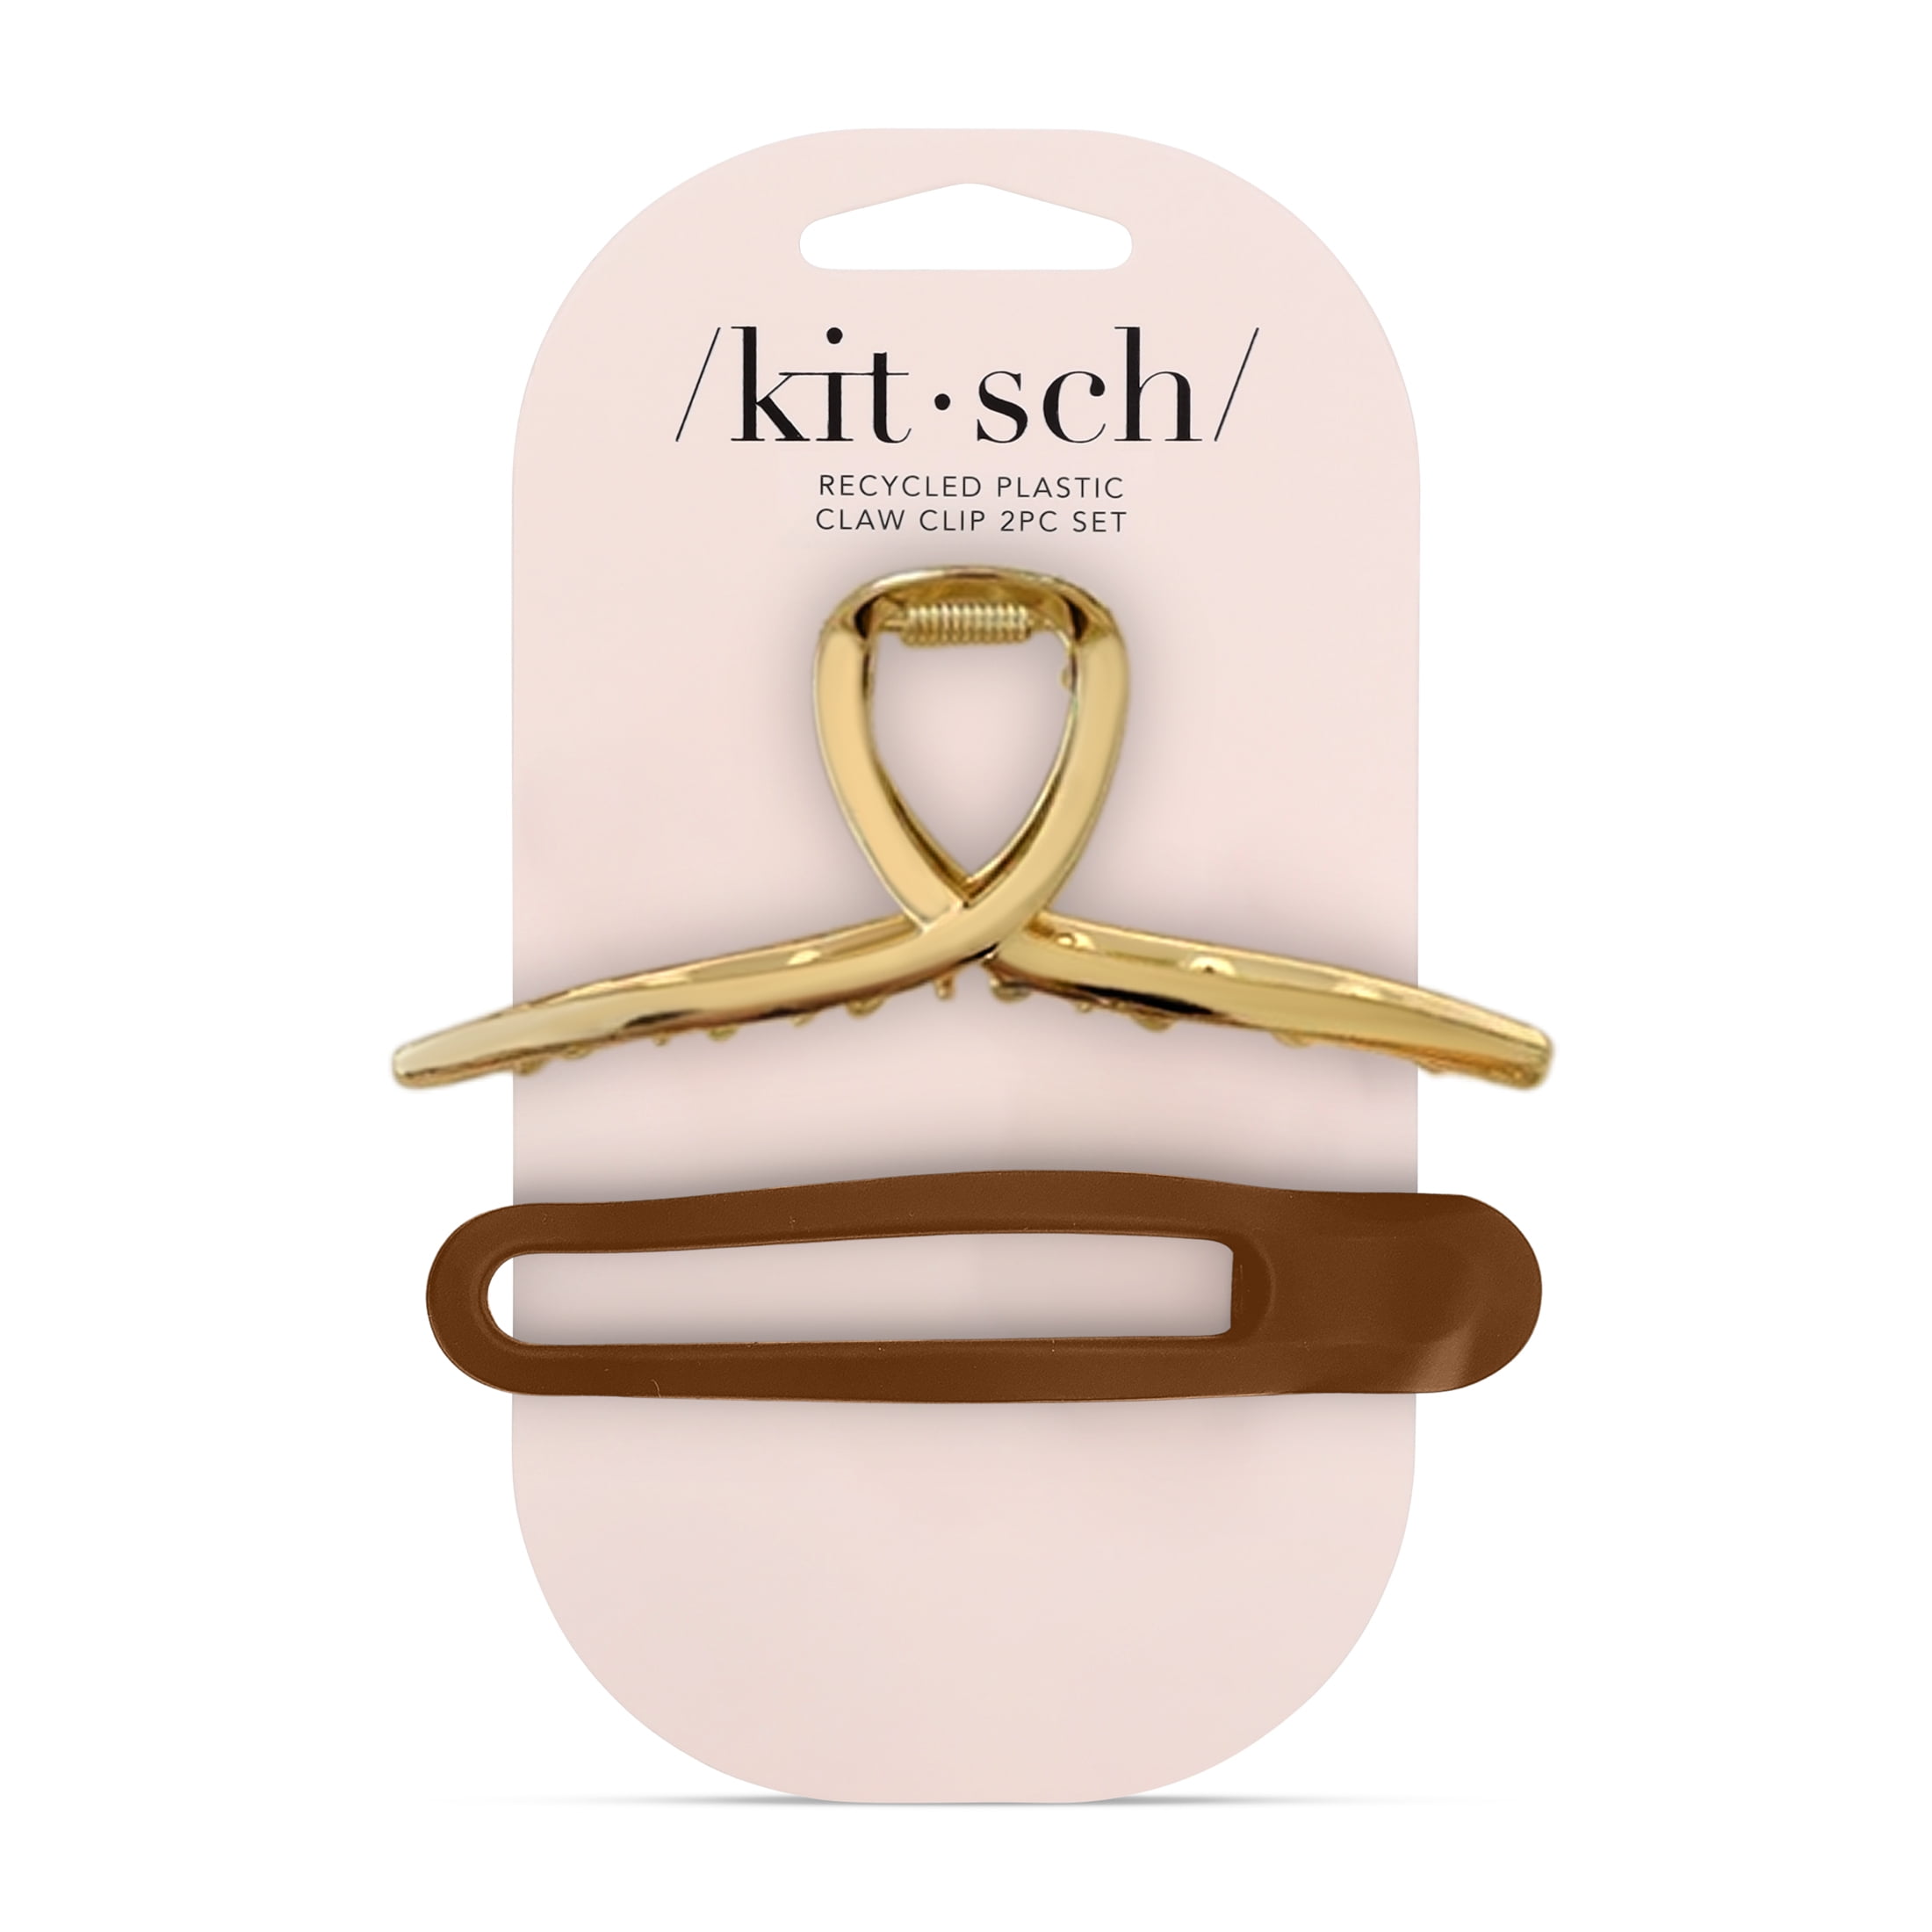 Kitsch Claw Clip Set 2pcs with Metal Loop & Flat Lay Curved Claw, Gold / Brown